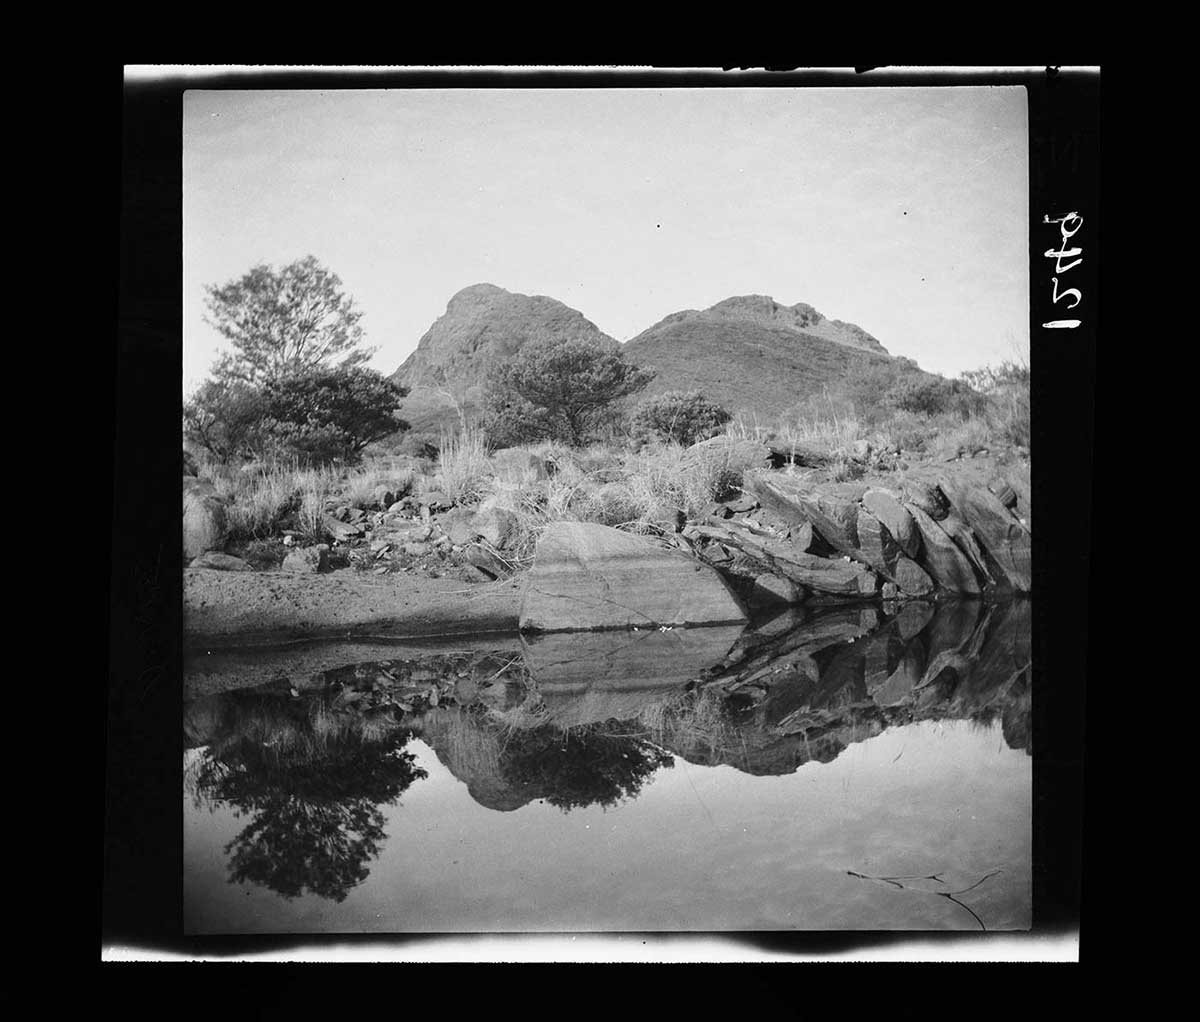 Waterhole at foot of Ruined Rampart, Petermann Ranges, Northern Territory 1926. The waterhole is in the image foreground. Its surface is still and mirror-like, reflecting the landscape and the sky. In the middle ground at the water's edge are numerous large rocks, some stacked next to each other like books. A large smooth rock in the image centre disappears into the water. Beyond the rocks is scrub with scattered trees and bushes. In the distance is a mountain range, with two ridges in front and a third ridge behind them. - click to view larger image